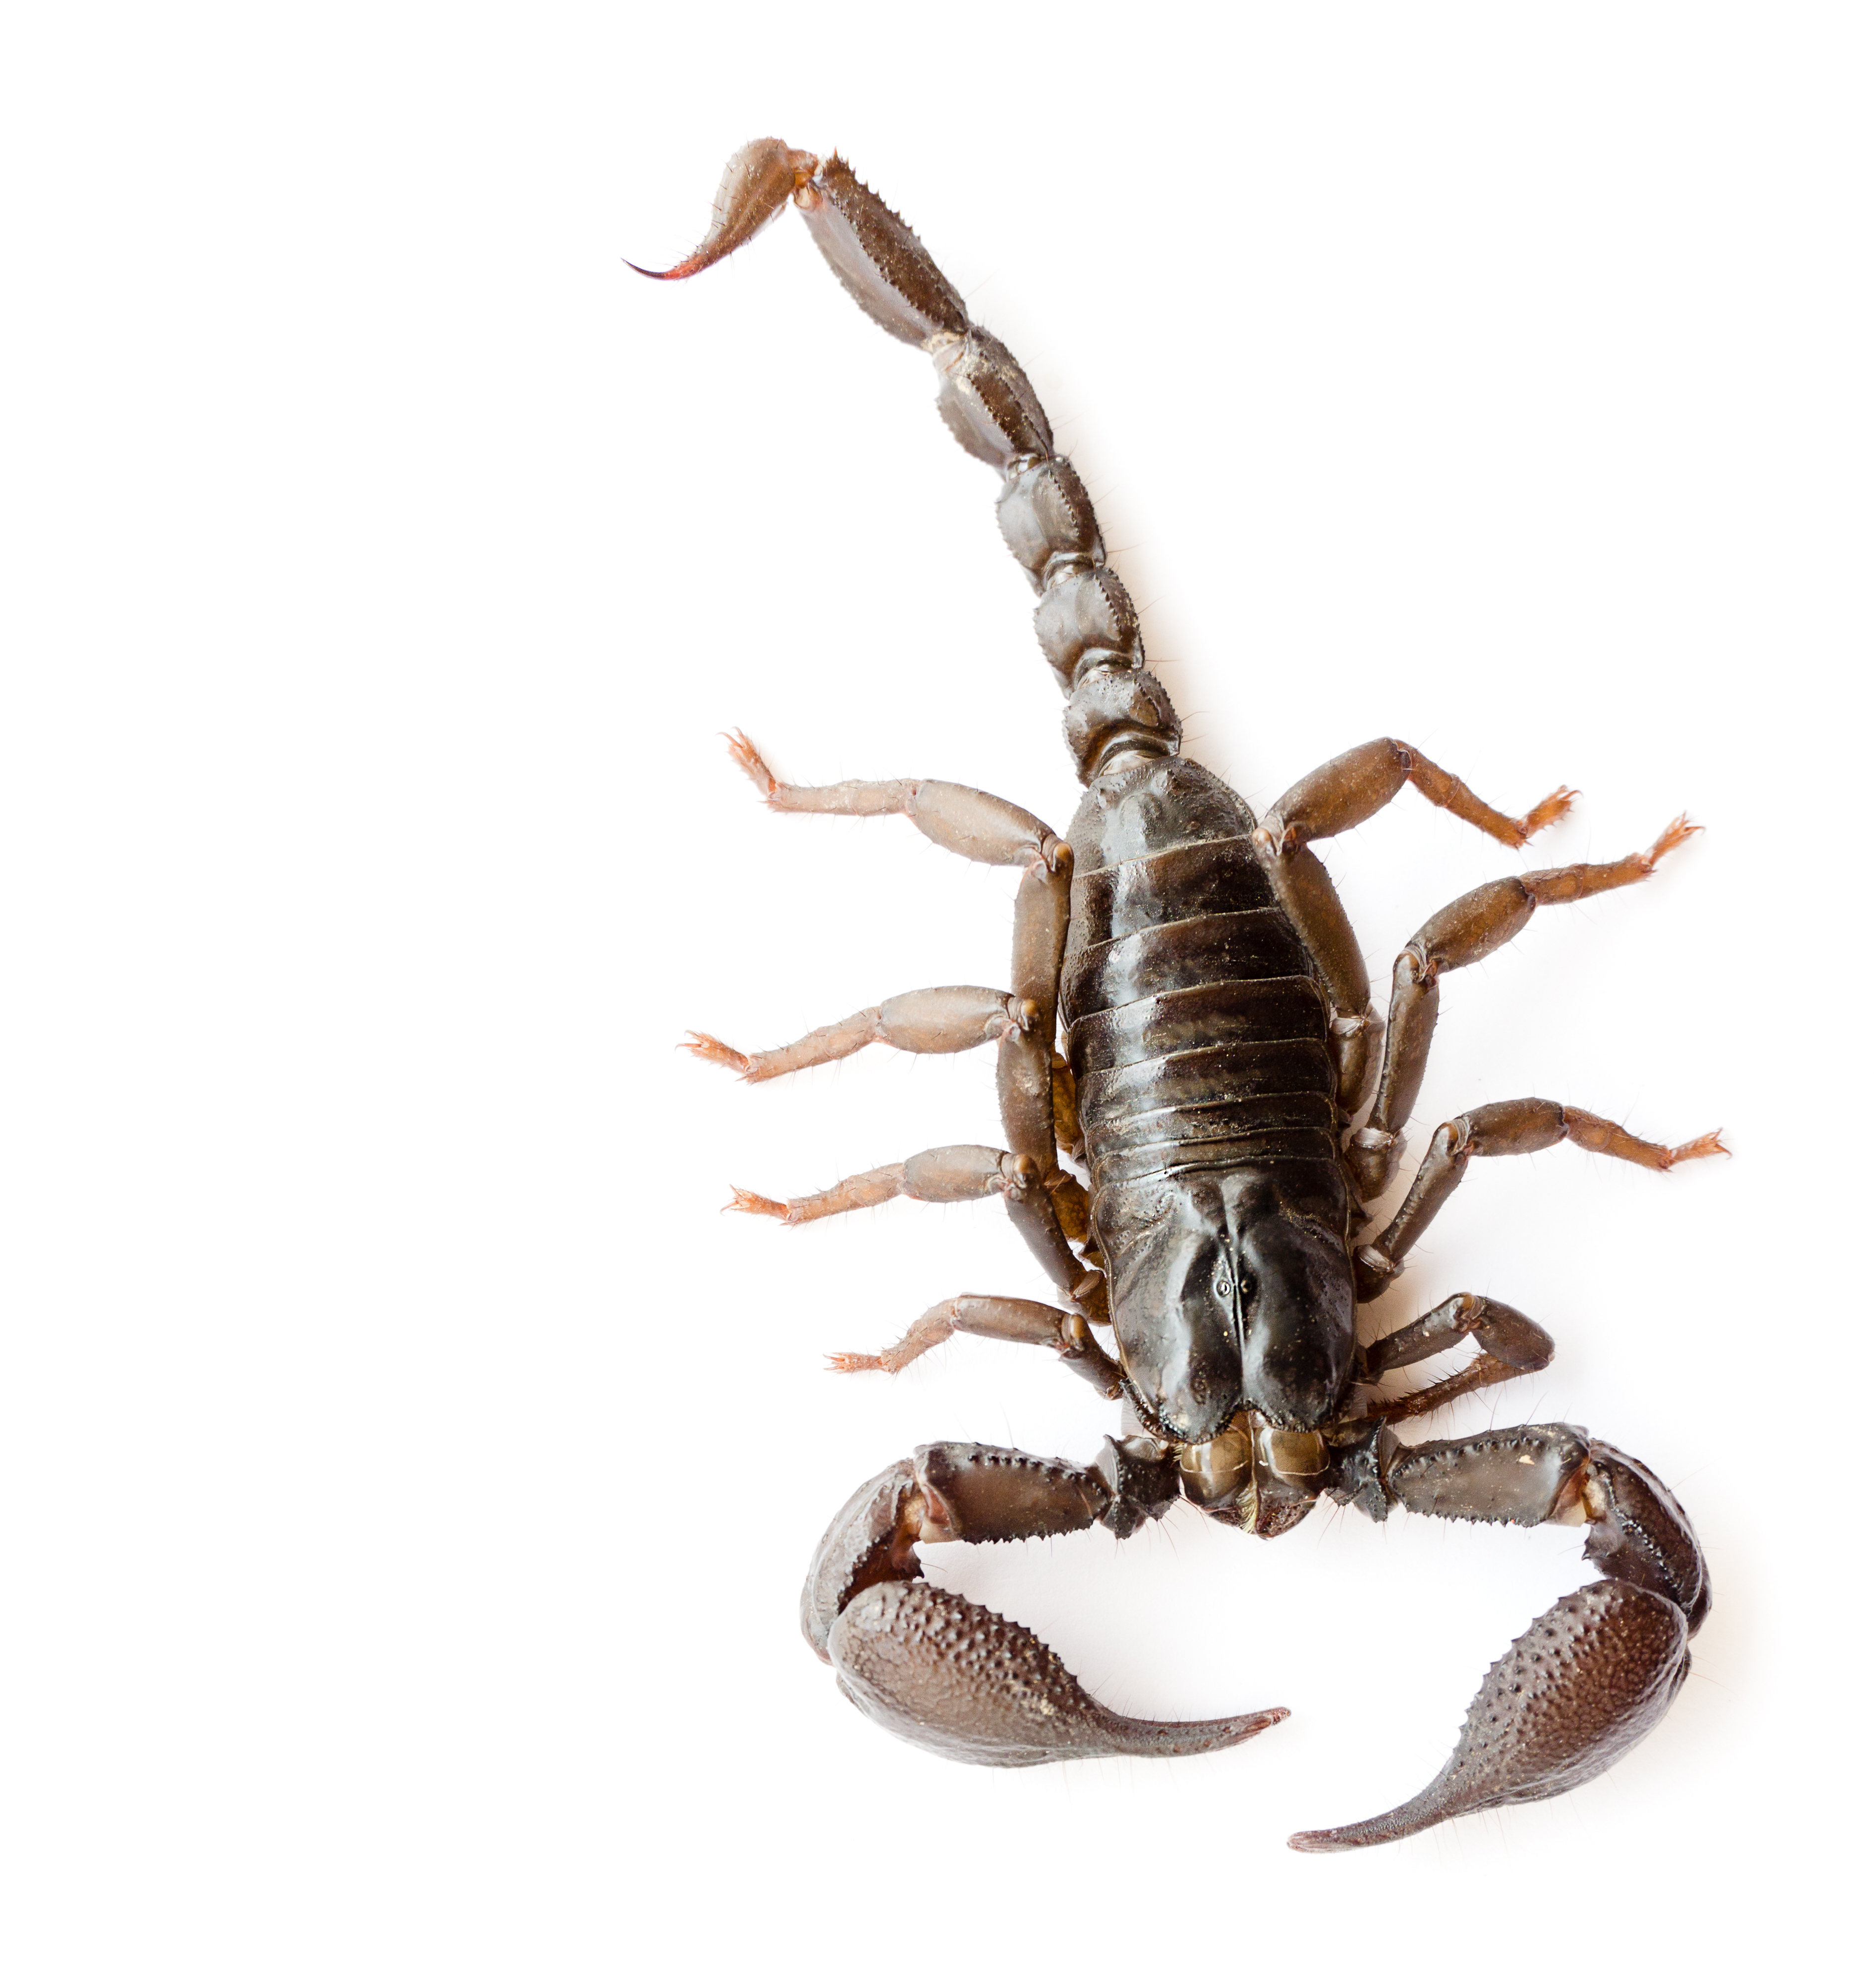 Close-Up Of Scorpion Over White Background